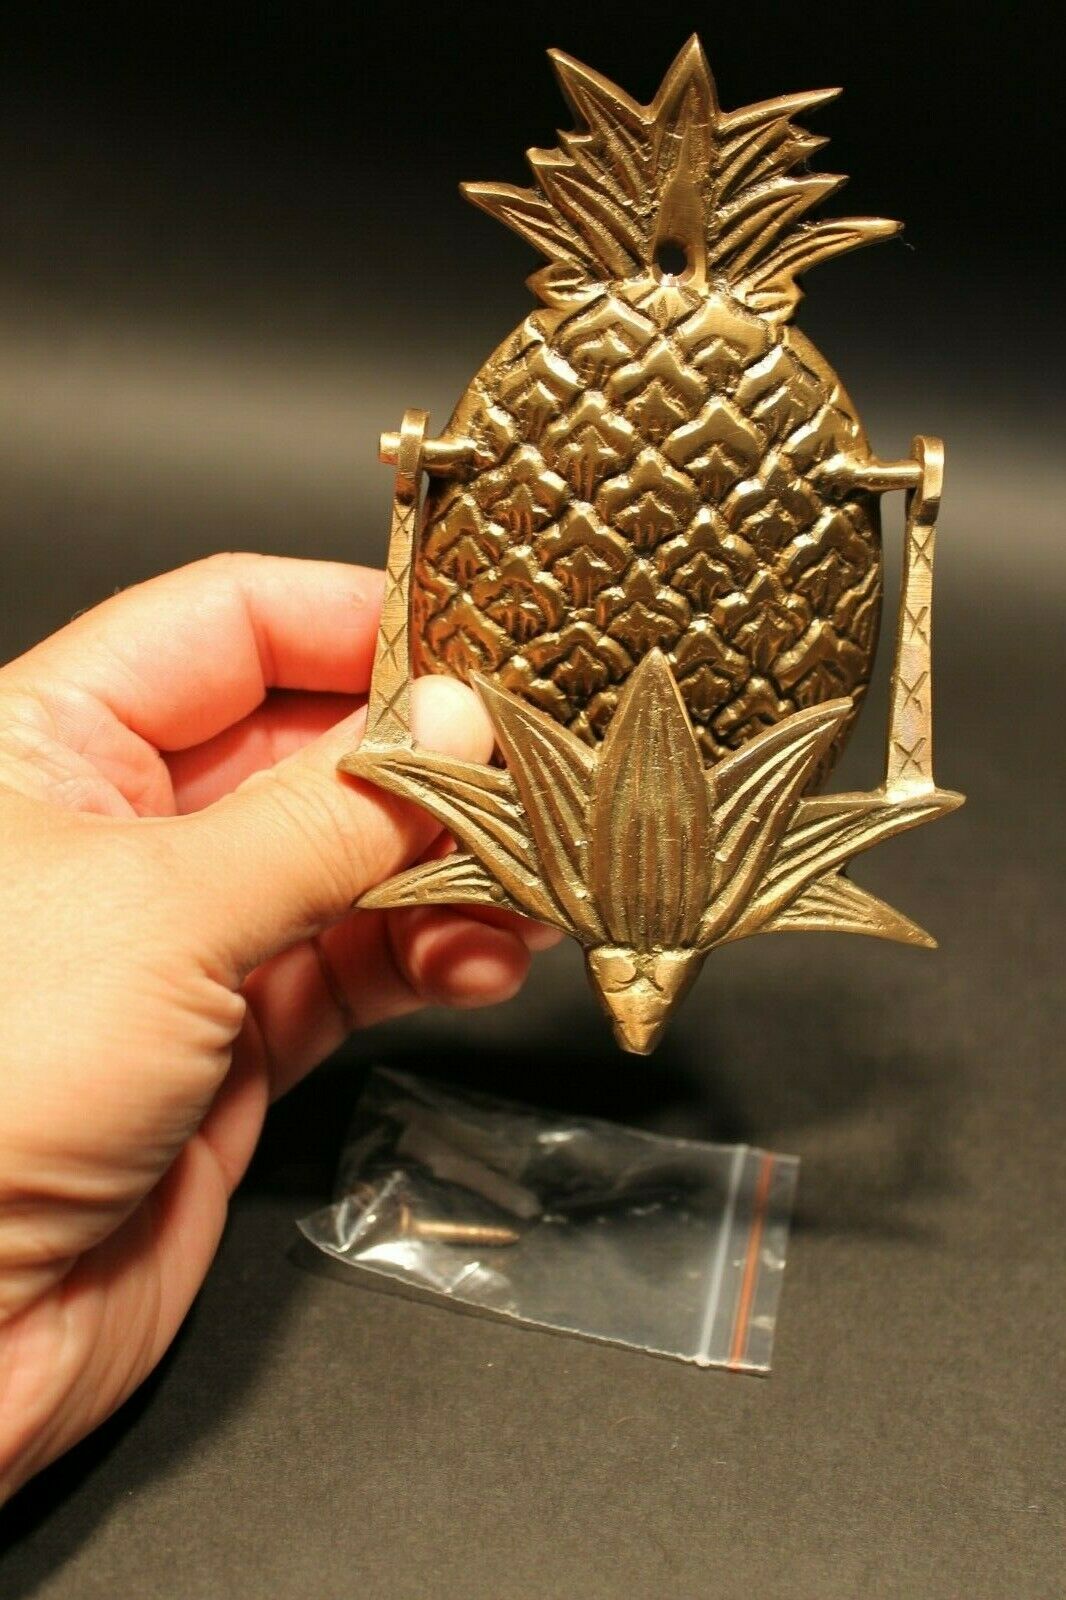 Antique Vintage Style Brass Pineapple Door knocker - Early Home Decor